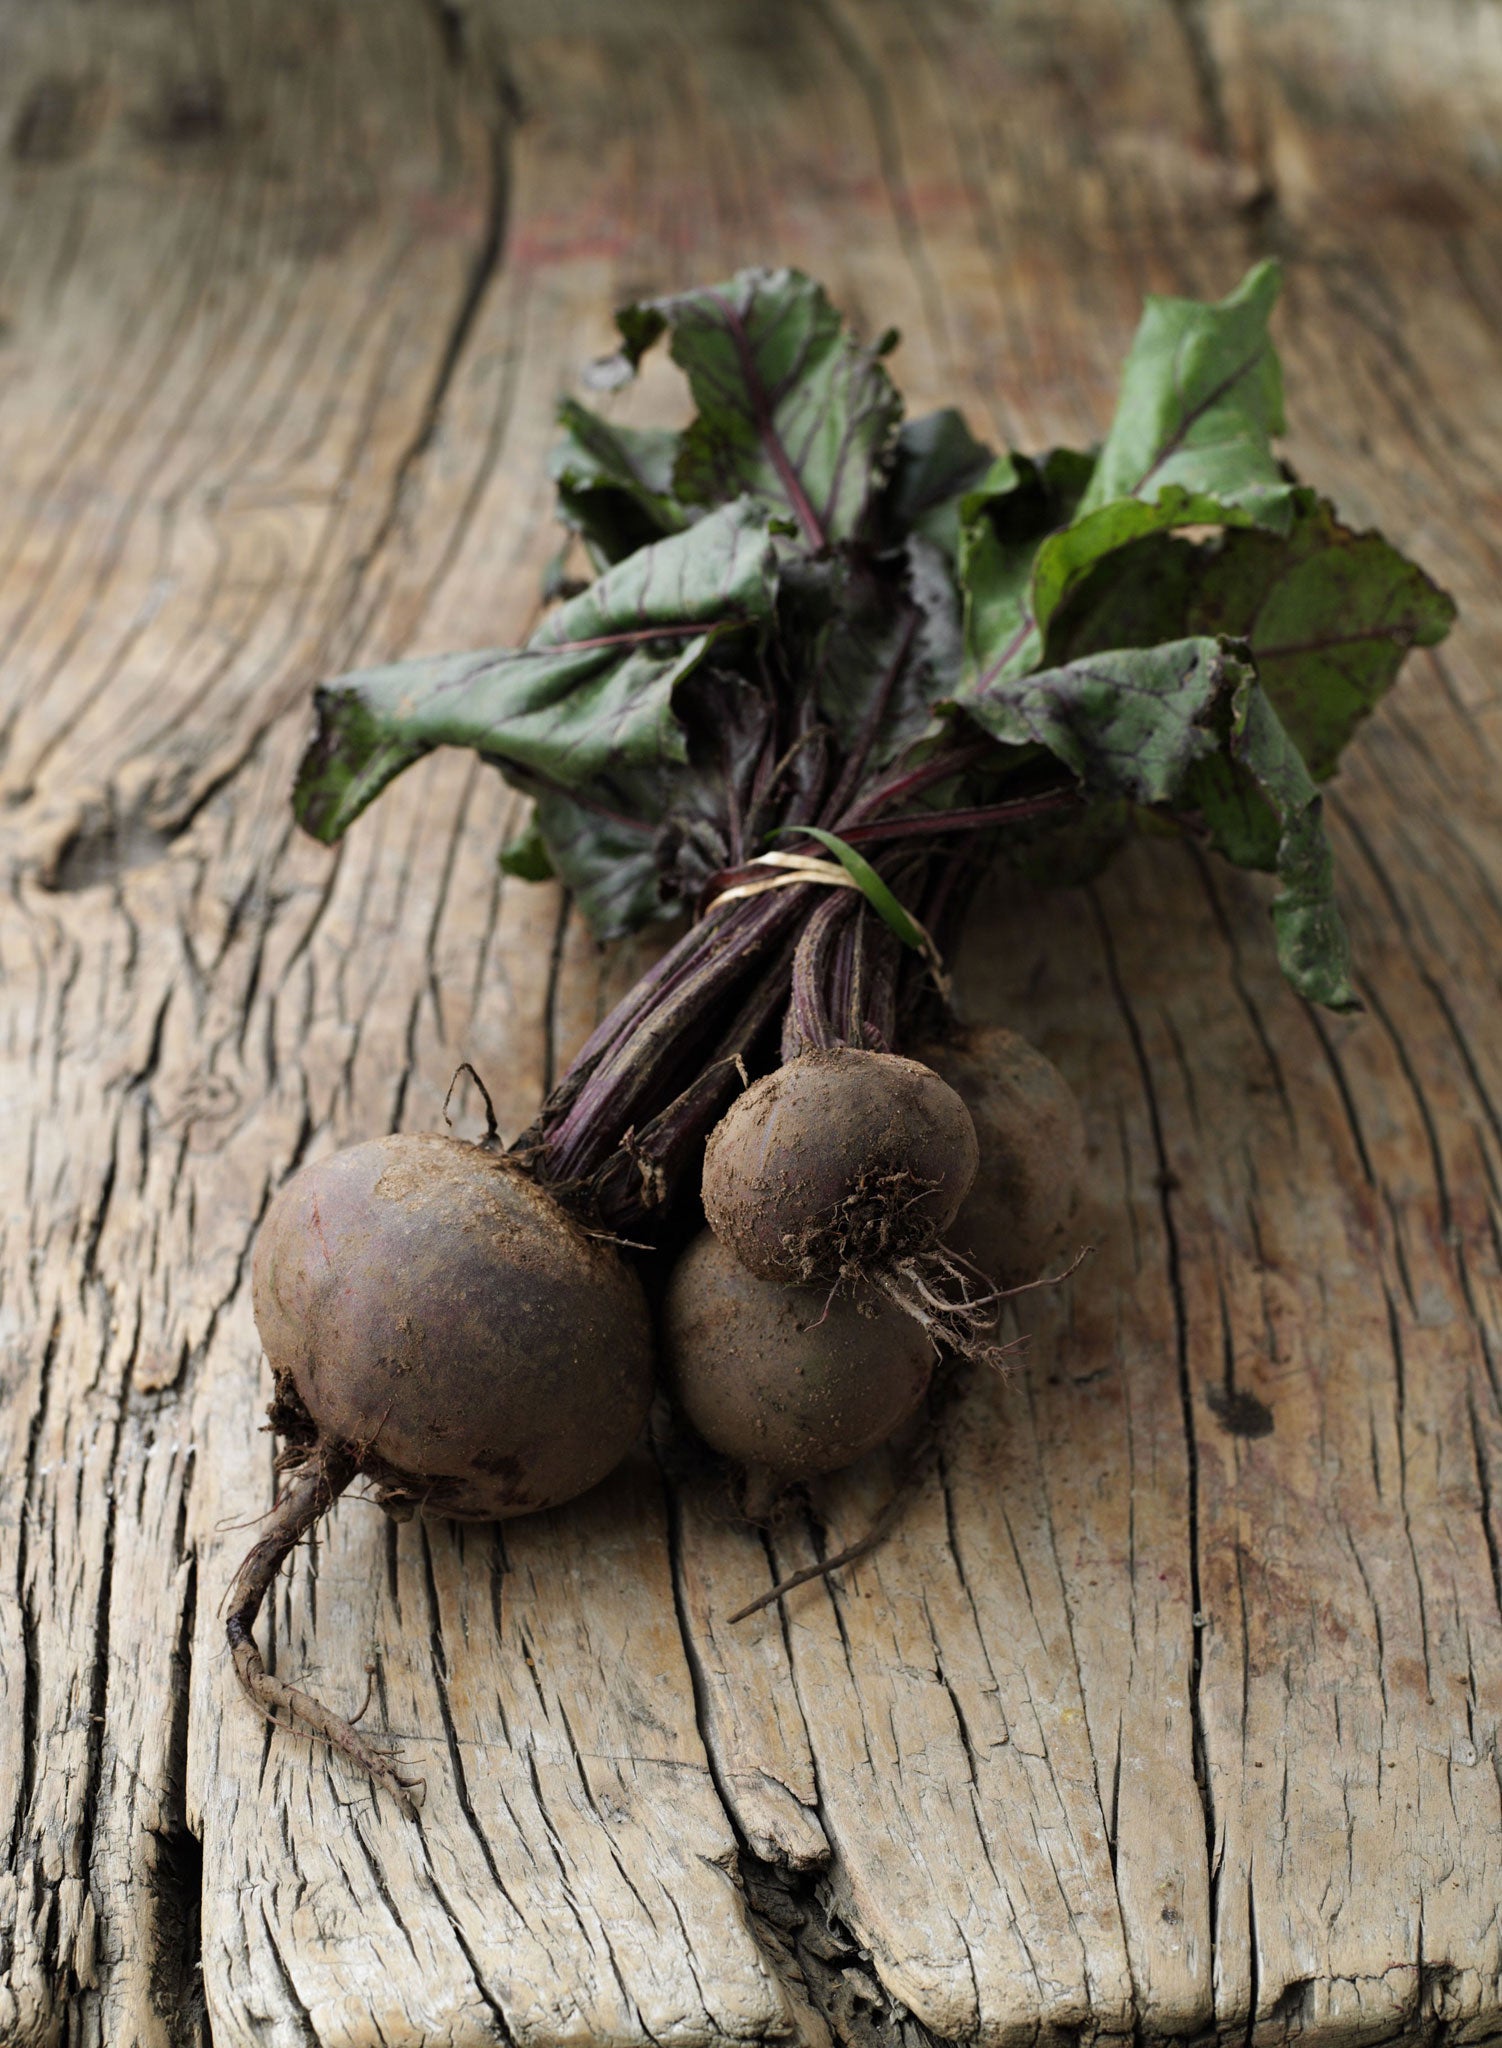 Growing beetroot in straight lines will give you 'the superior self-worth of an established plotholder', says Emma